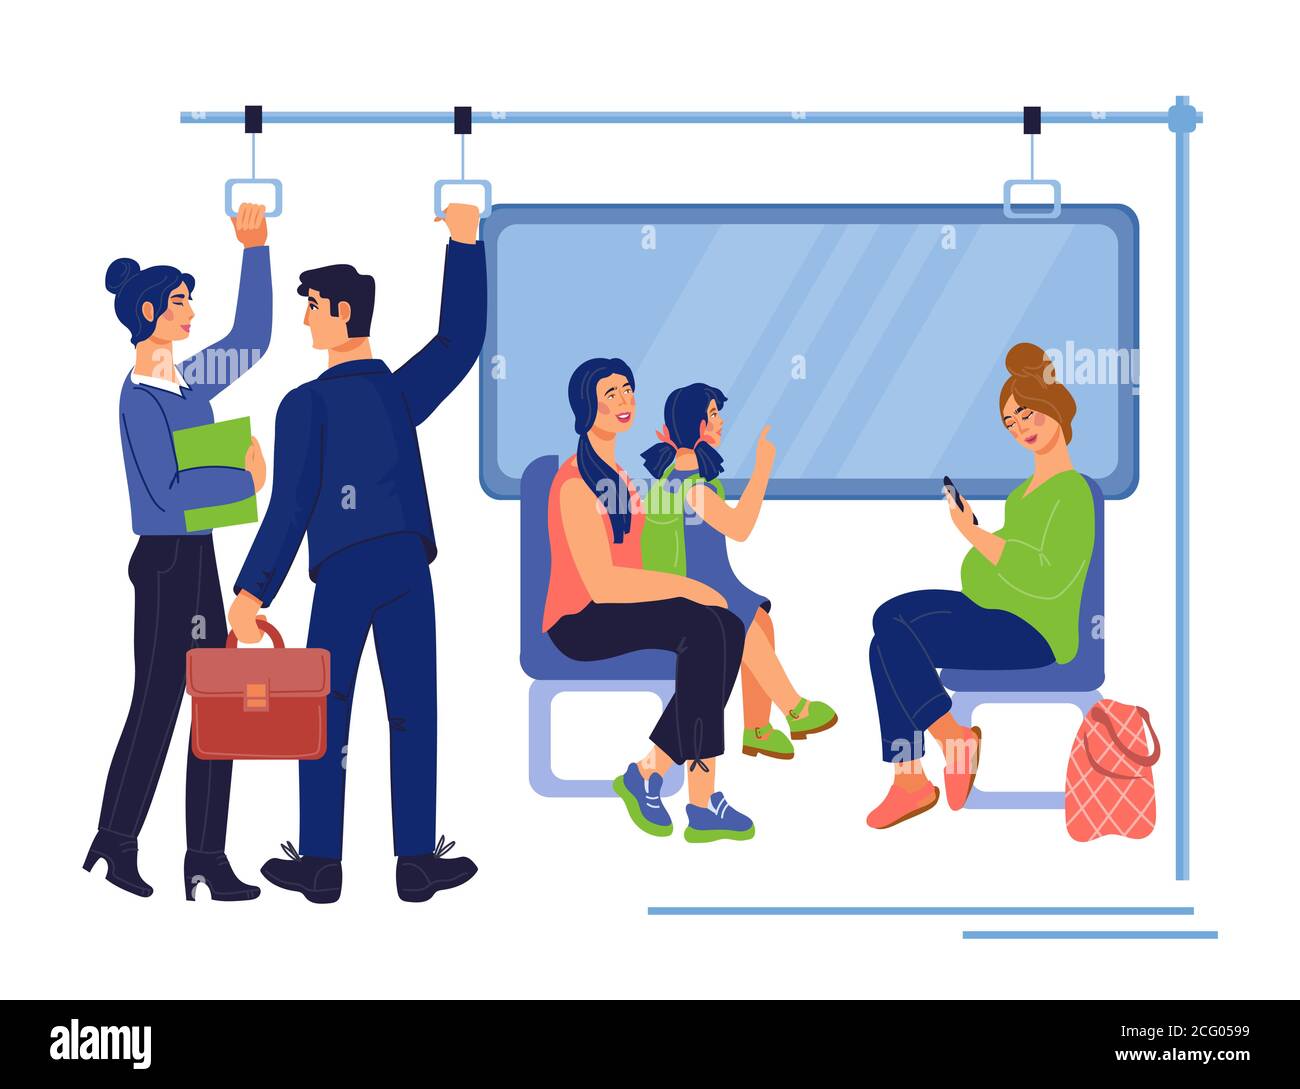 Passengers crowd in subway or suburban commute. Stock Vector